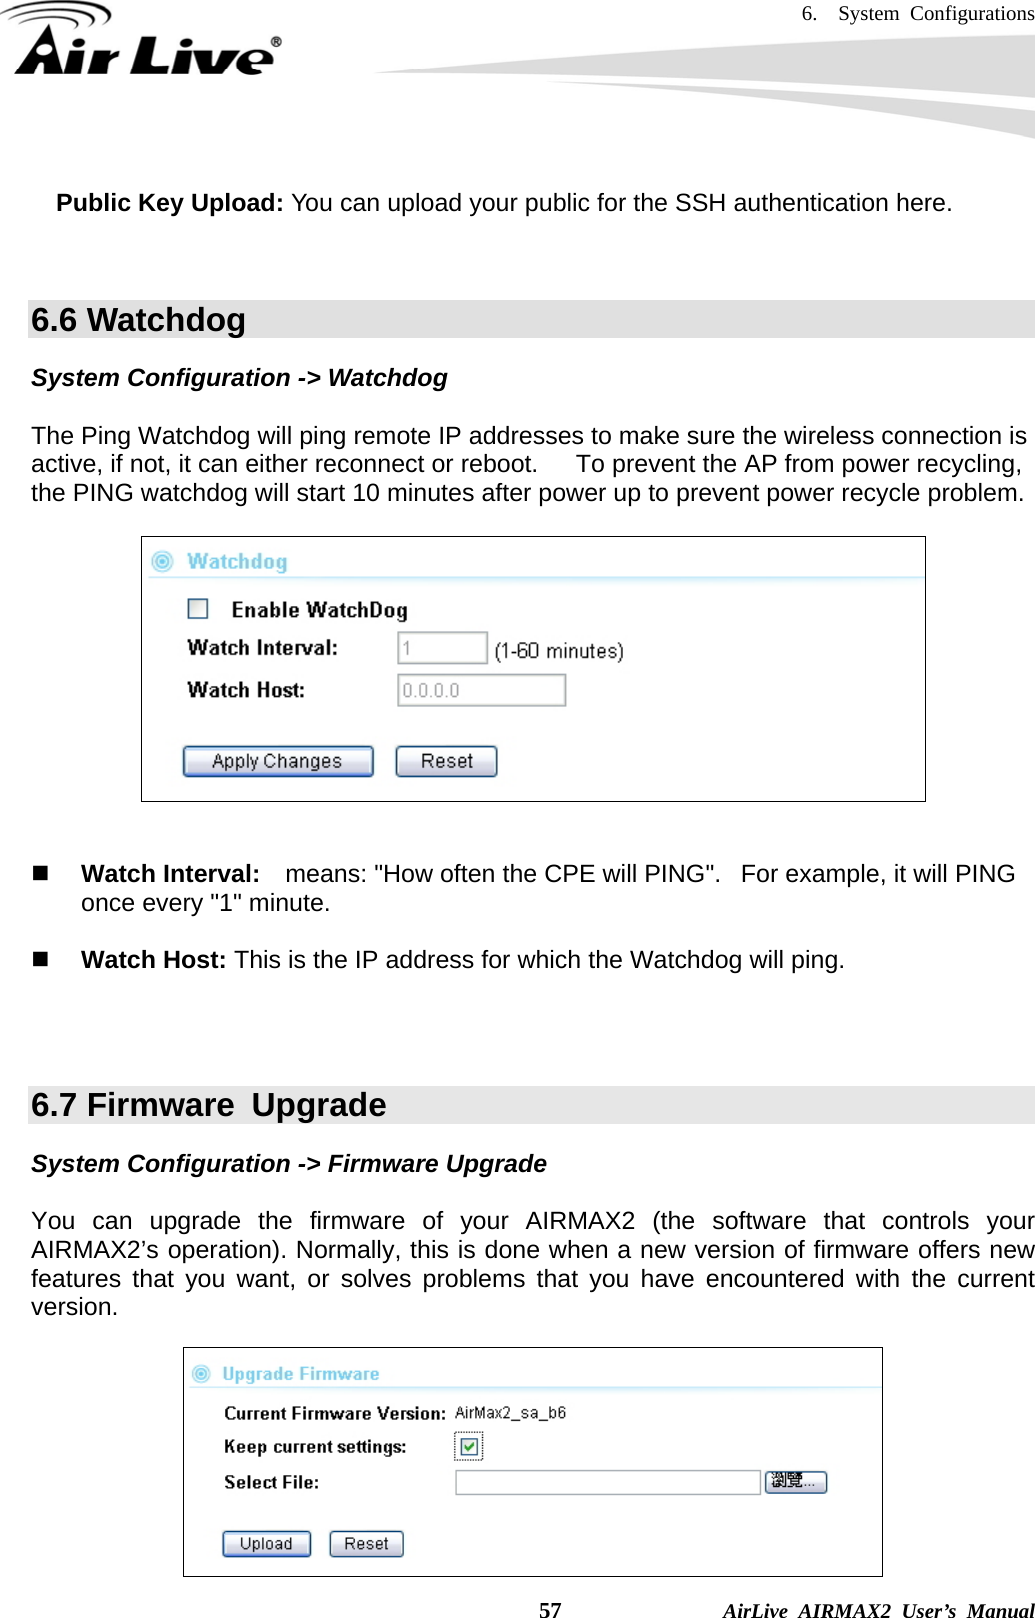 6.  System Configurations    57              AirLive AIRMAX2 User’s Manual  Public Key Upload: You can upload your public for the SSH authentication here.     6.6 Watchdog System Configuration -&gt; Watchdog  The Ping Watchdog will ping remote IP addresses to make sure the wireless connection is active, if not, it can either reconnect or reboot.      To prevent the AP from power recycling, the PING watchdog will start 10 minutes after power up to prevent power recycle problem.       Watch Interval:    means: &quot;How often the CPE will PING&quot;.   For example, it will PING once every &quot;1&quot; minute.    Watch Host: This is the IP address for which the Watchdog will ping.    6.7 Firmware  Upgrade System Configuration -&gt; Firmware Upgrade  You can upgrade the firmware of your AIRMAX2 (the software that controls your AIRMAX2’s operation). Normally, this is done when a new version of firmware offers new features that you want, or solves problems that you have encountered with the current version.   